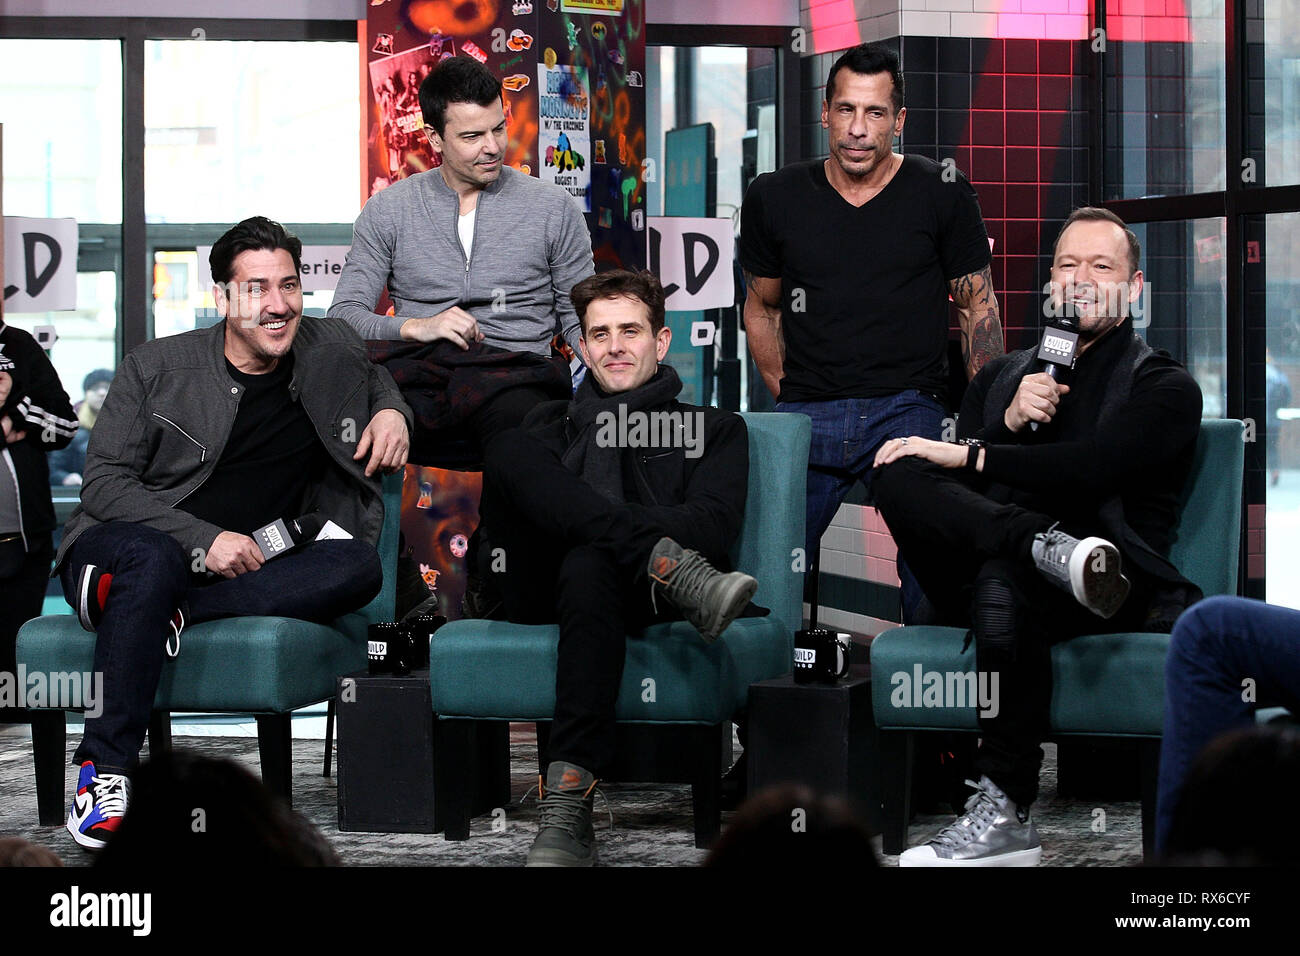 New York, USA. 08 Mar, 2019. Jonathan Knight, Jordan Knight, Joey McIntyre, Danny Mack, and, Donnie Whalberg at The Friday, Mar 8, 2019 BUILD Series with New Kids On The Block discussing The 'Hangin' Tough' reissue at BUILD Studio in New York, USA. Credit: Steve Mack/S.D. Mack Pictures/Alamy Live Credit: Steve Mack/Alamy Live News Stock Photo